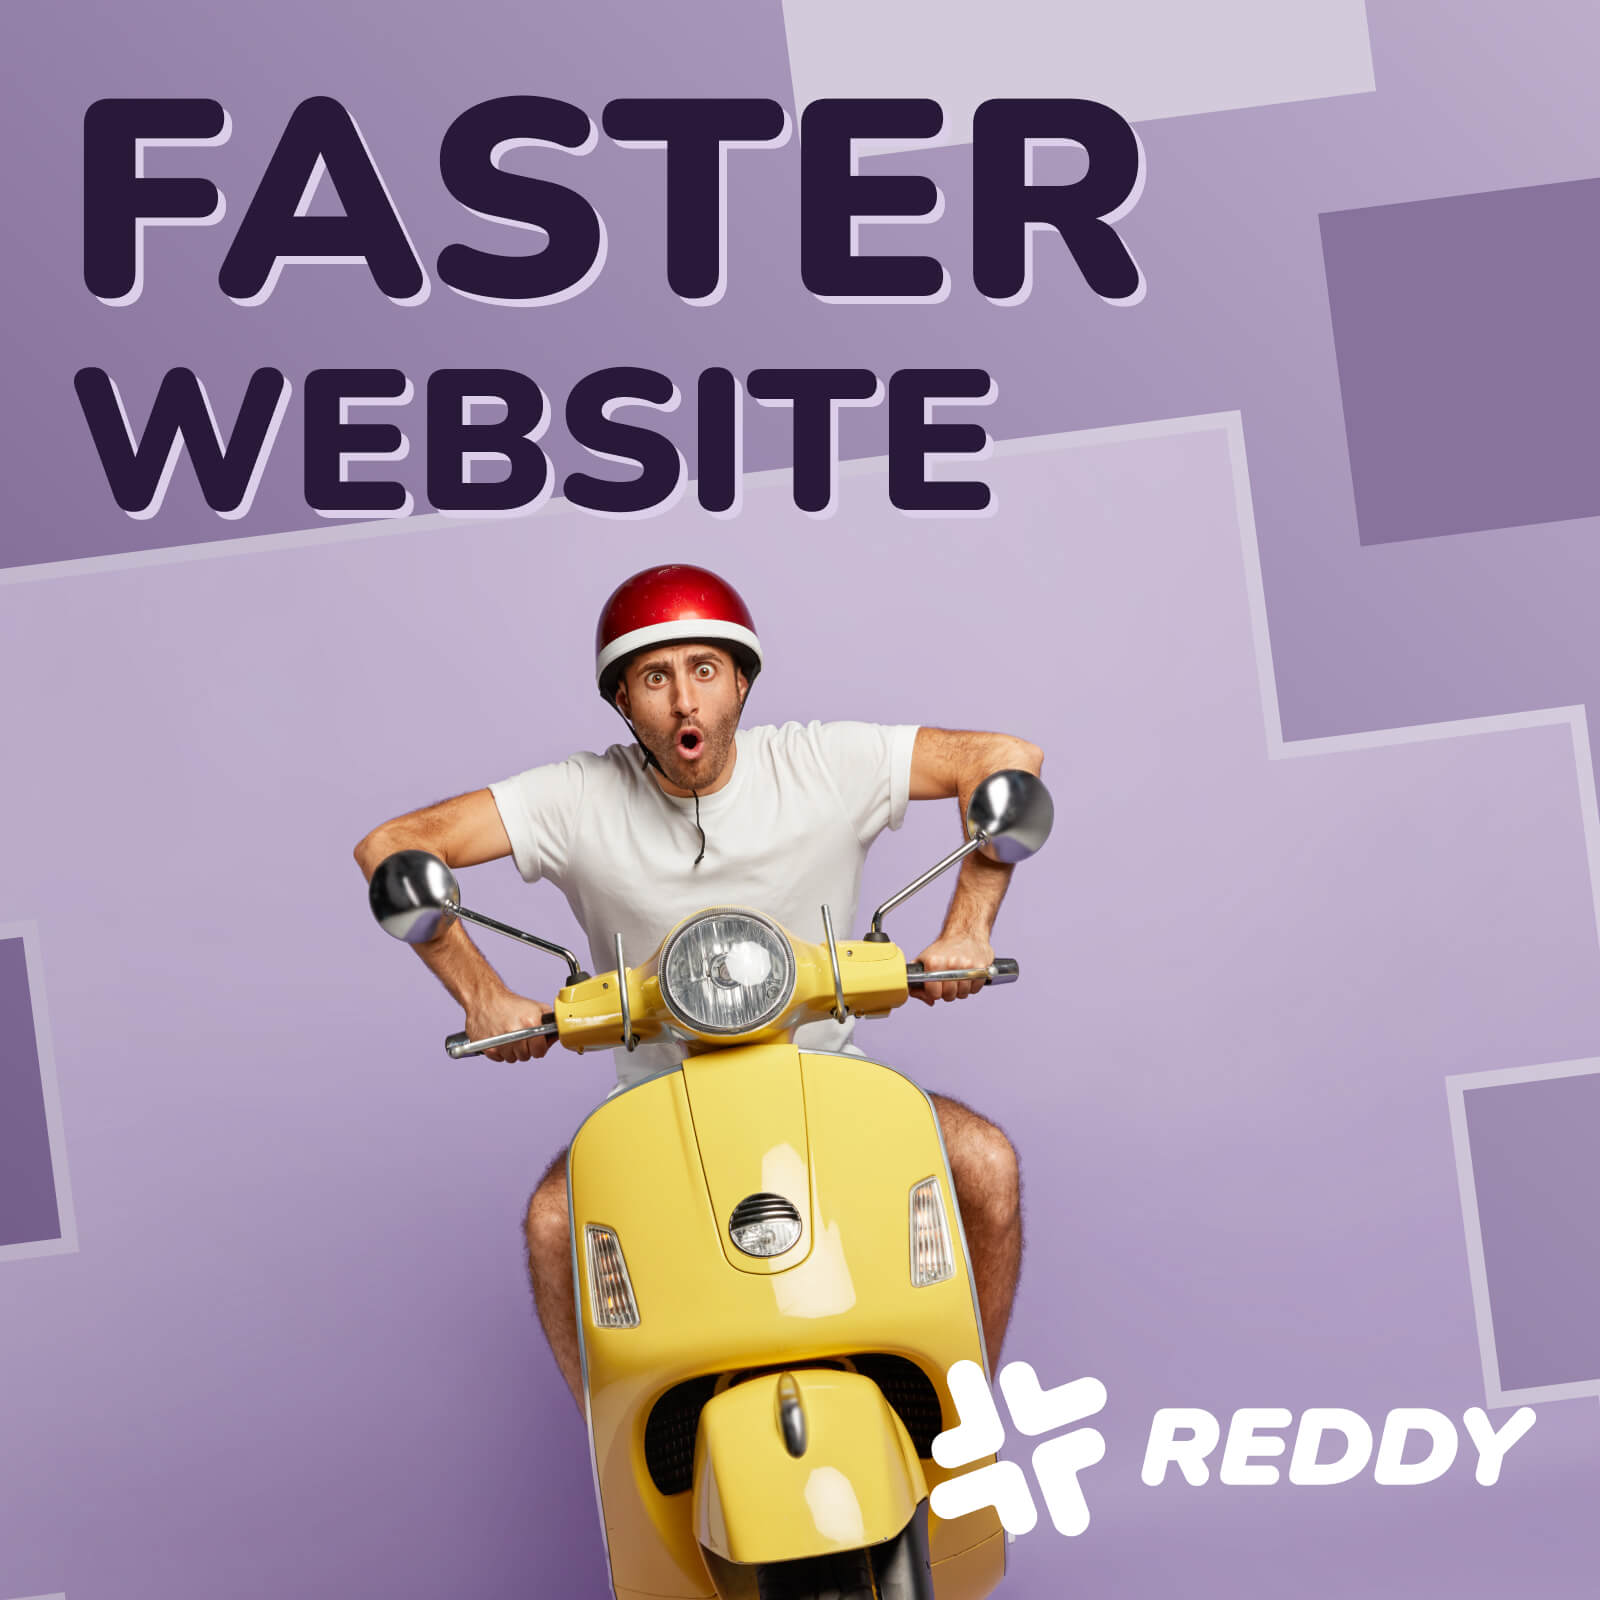 A man going fast on a yellow motorbike. Make your website faster today!